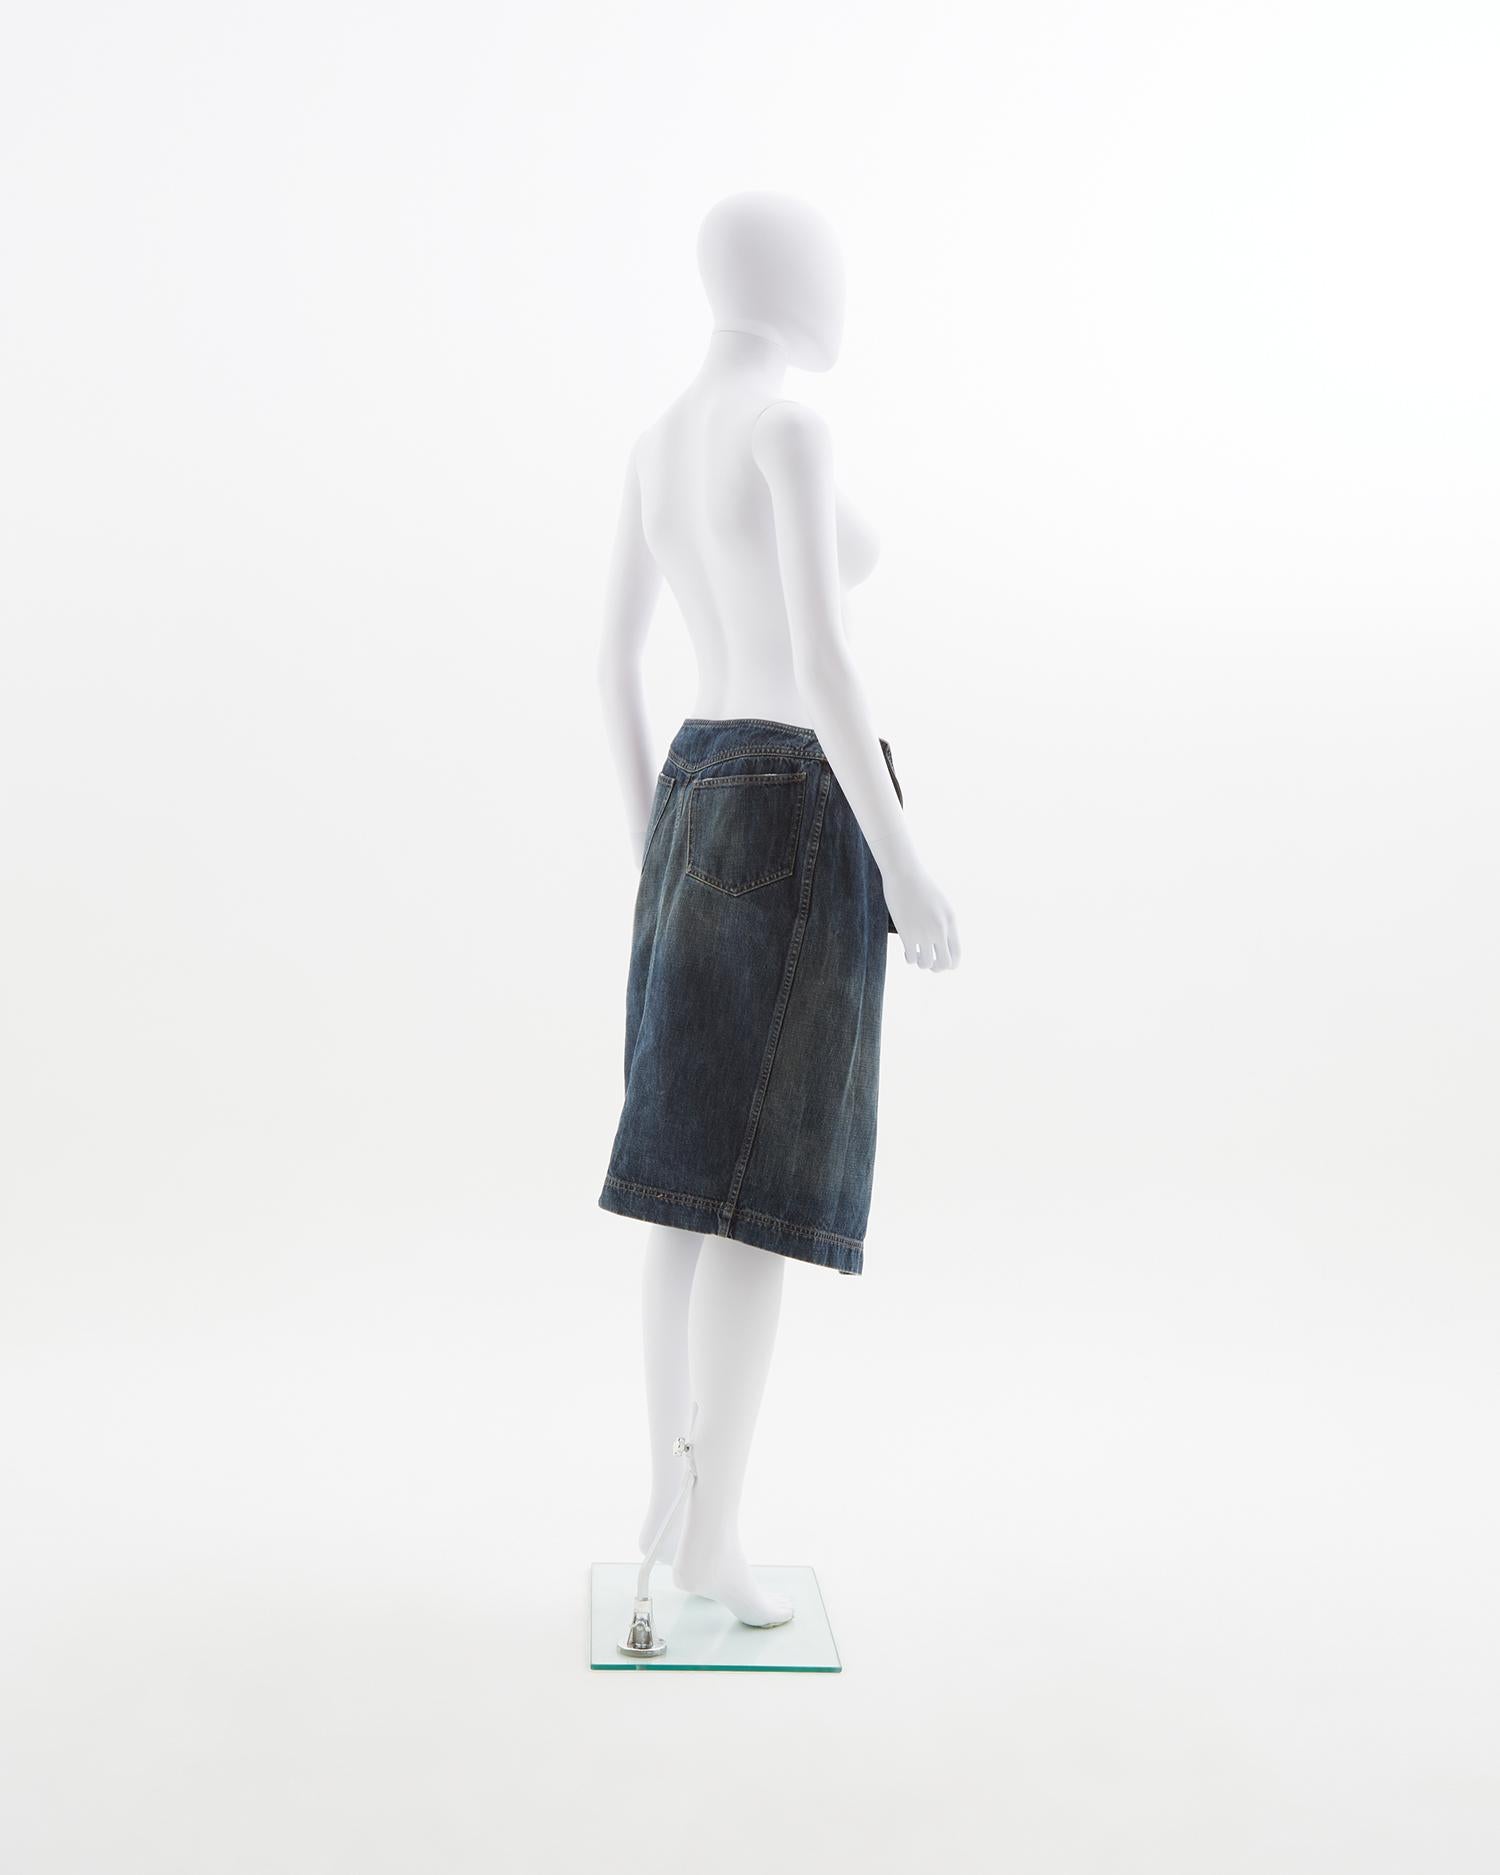 - Designed by Tom Ford 
- Sold by Skof.Archive
- Wrap mid-rise skirt 
- Pin detail with Gucci logo engraved 
- Spring Summer 2000

Size: 
FR 36 - IT 40 - UK 8 - US 4 (EU)

Measurements:
Waist  39 cm / 15”
Total Length  64 cm / 25”

Composition: